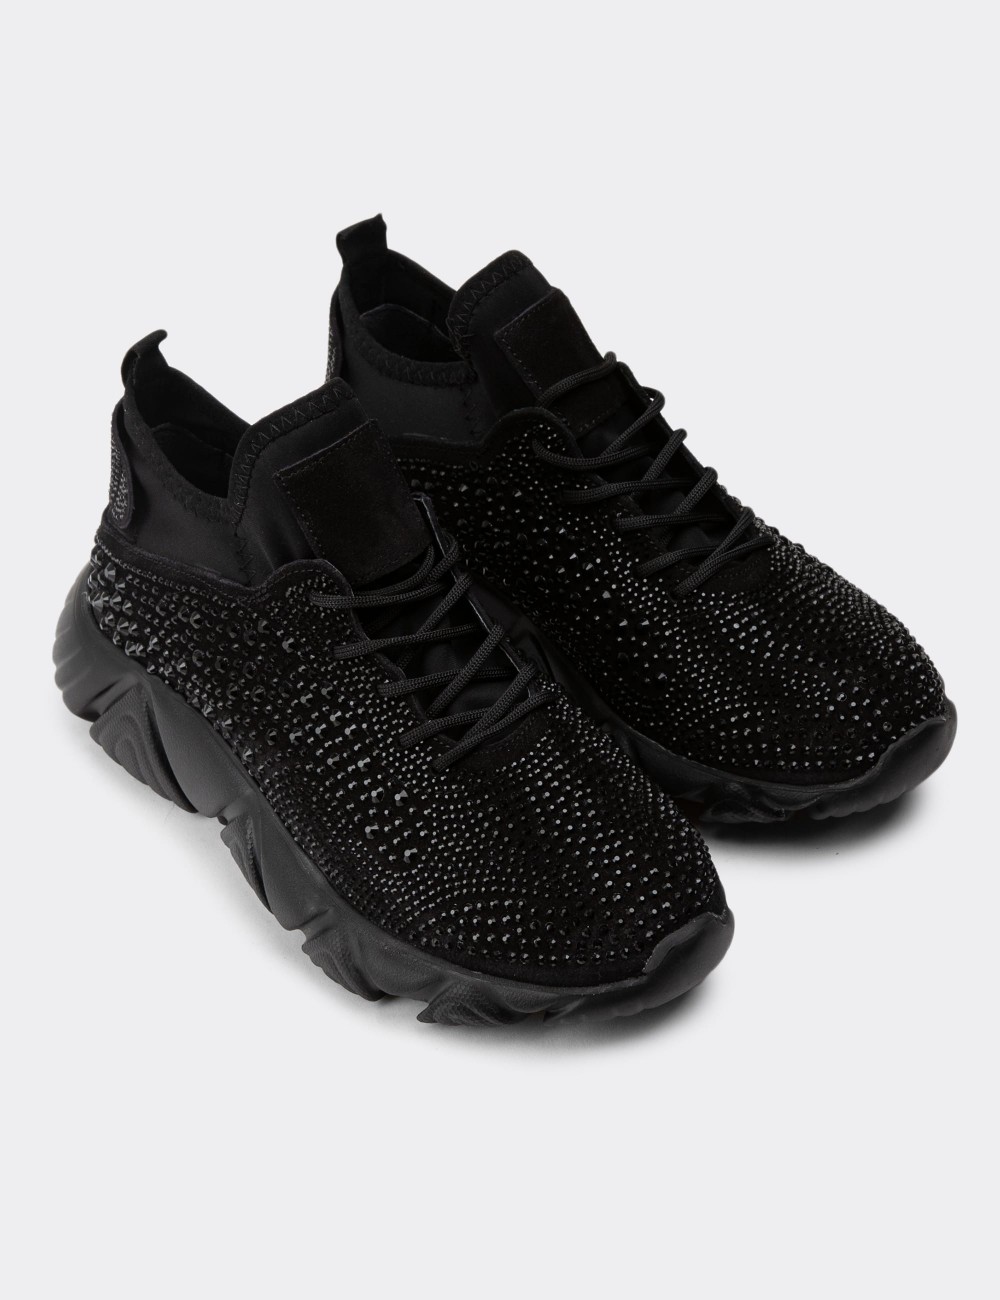 Black Suede Leather Sneakers - R6540ZSYHP01